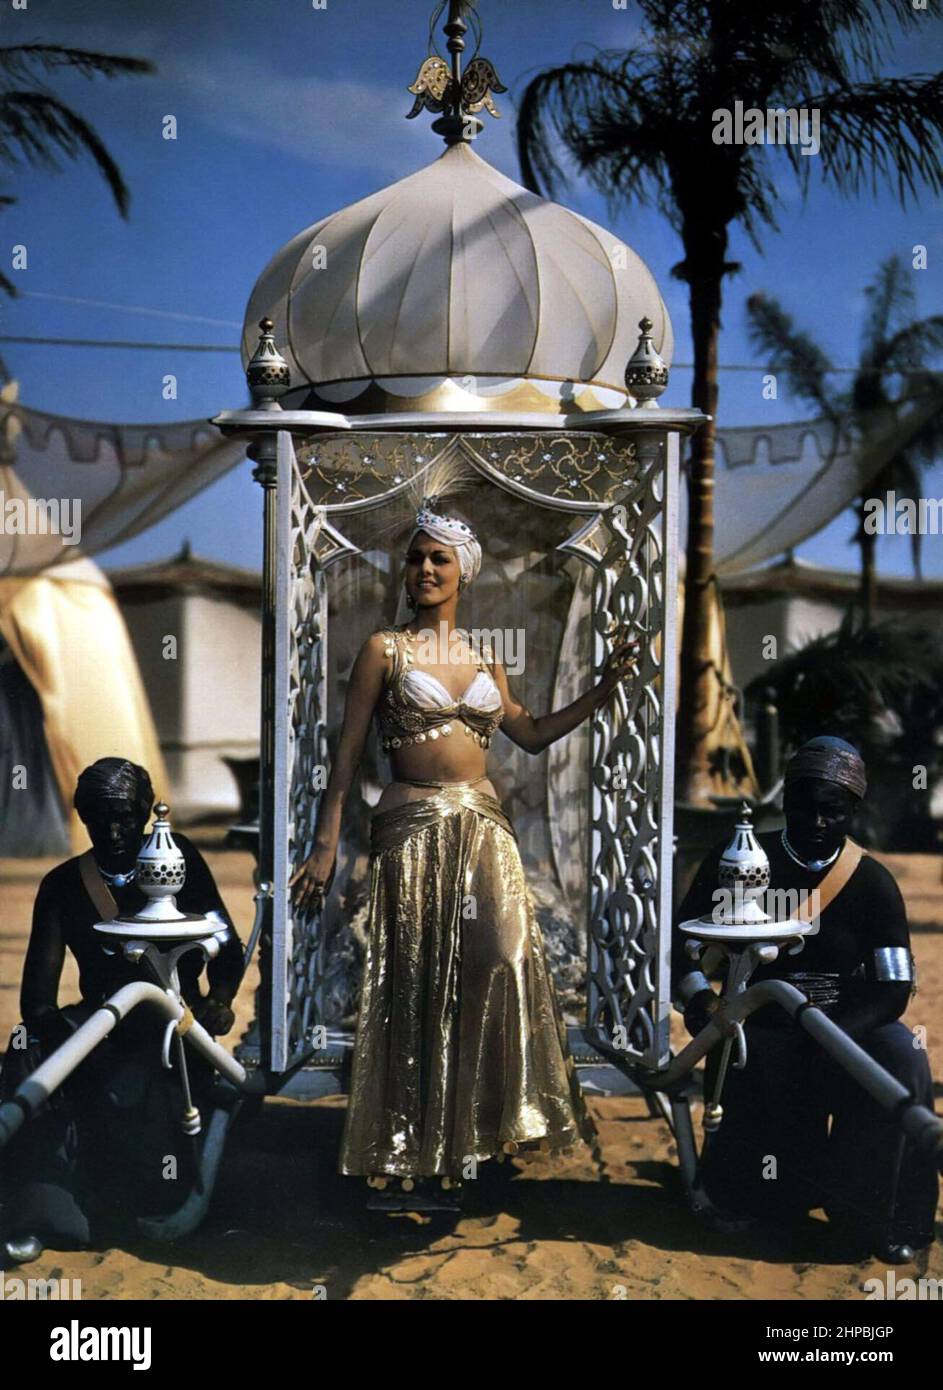 MARIA MONTEZ in ARABIAN NIGHTS (1942), directed by JOHN RAWLINS. Credit: UNIVERSAL PICTURES / Album Stock Photo